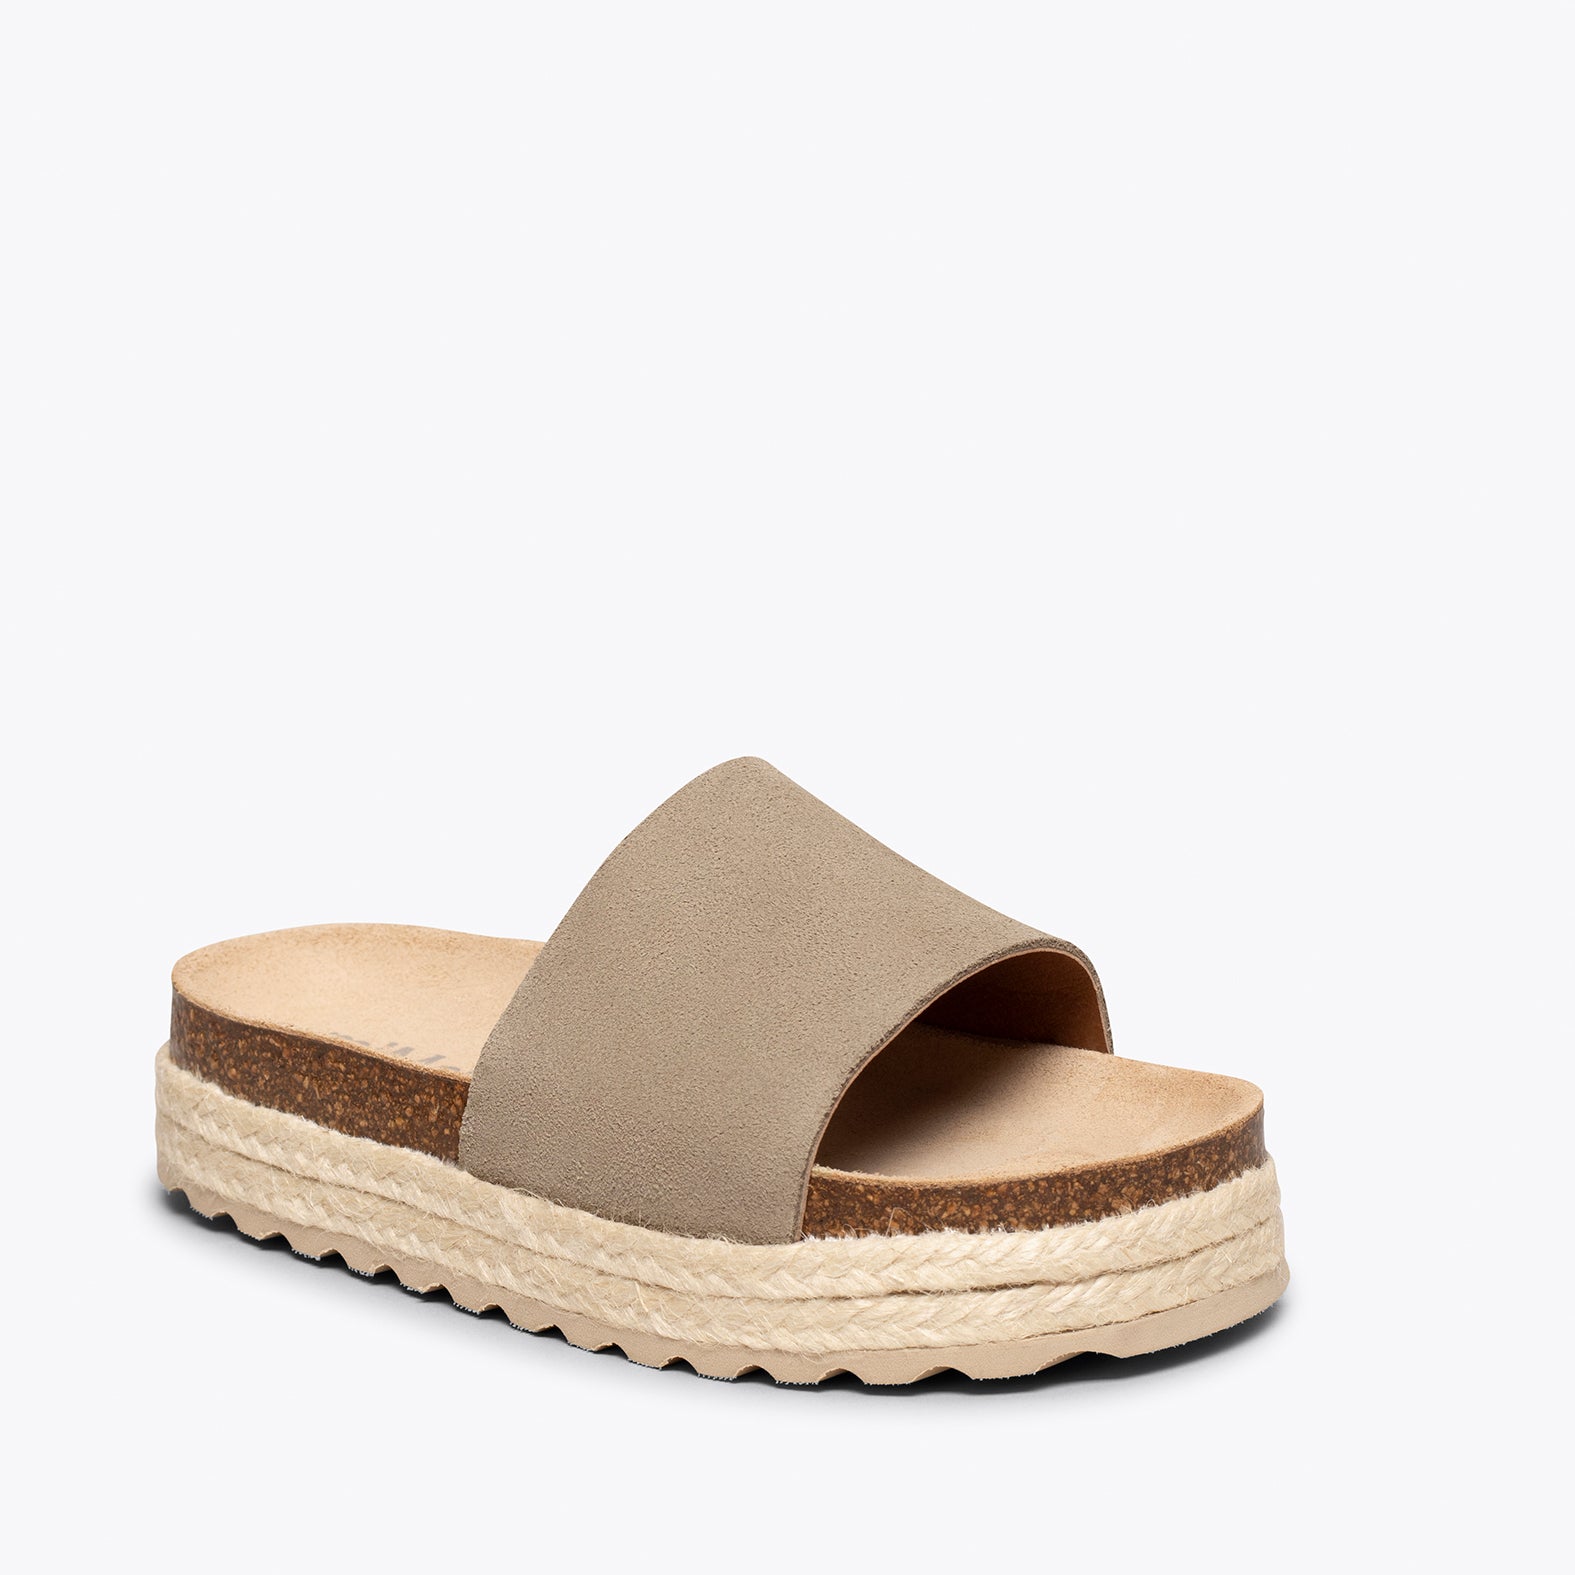 STRAWBERRY – TAUPE flat sandals for girls